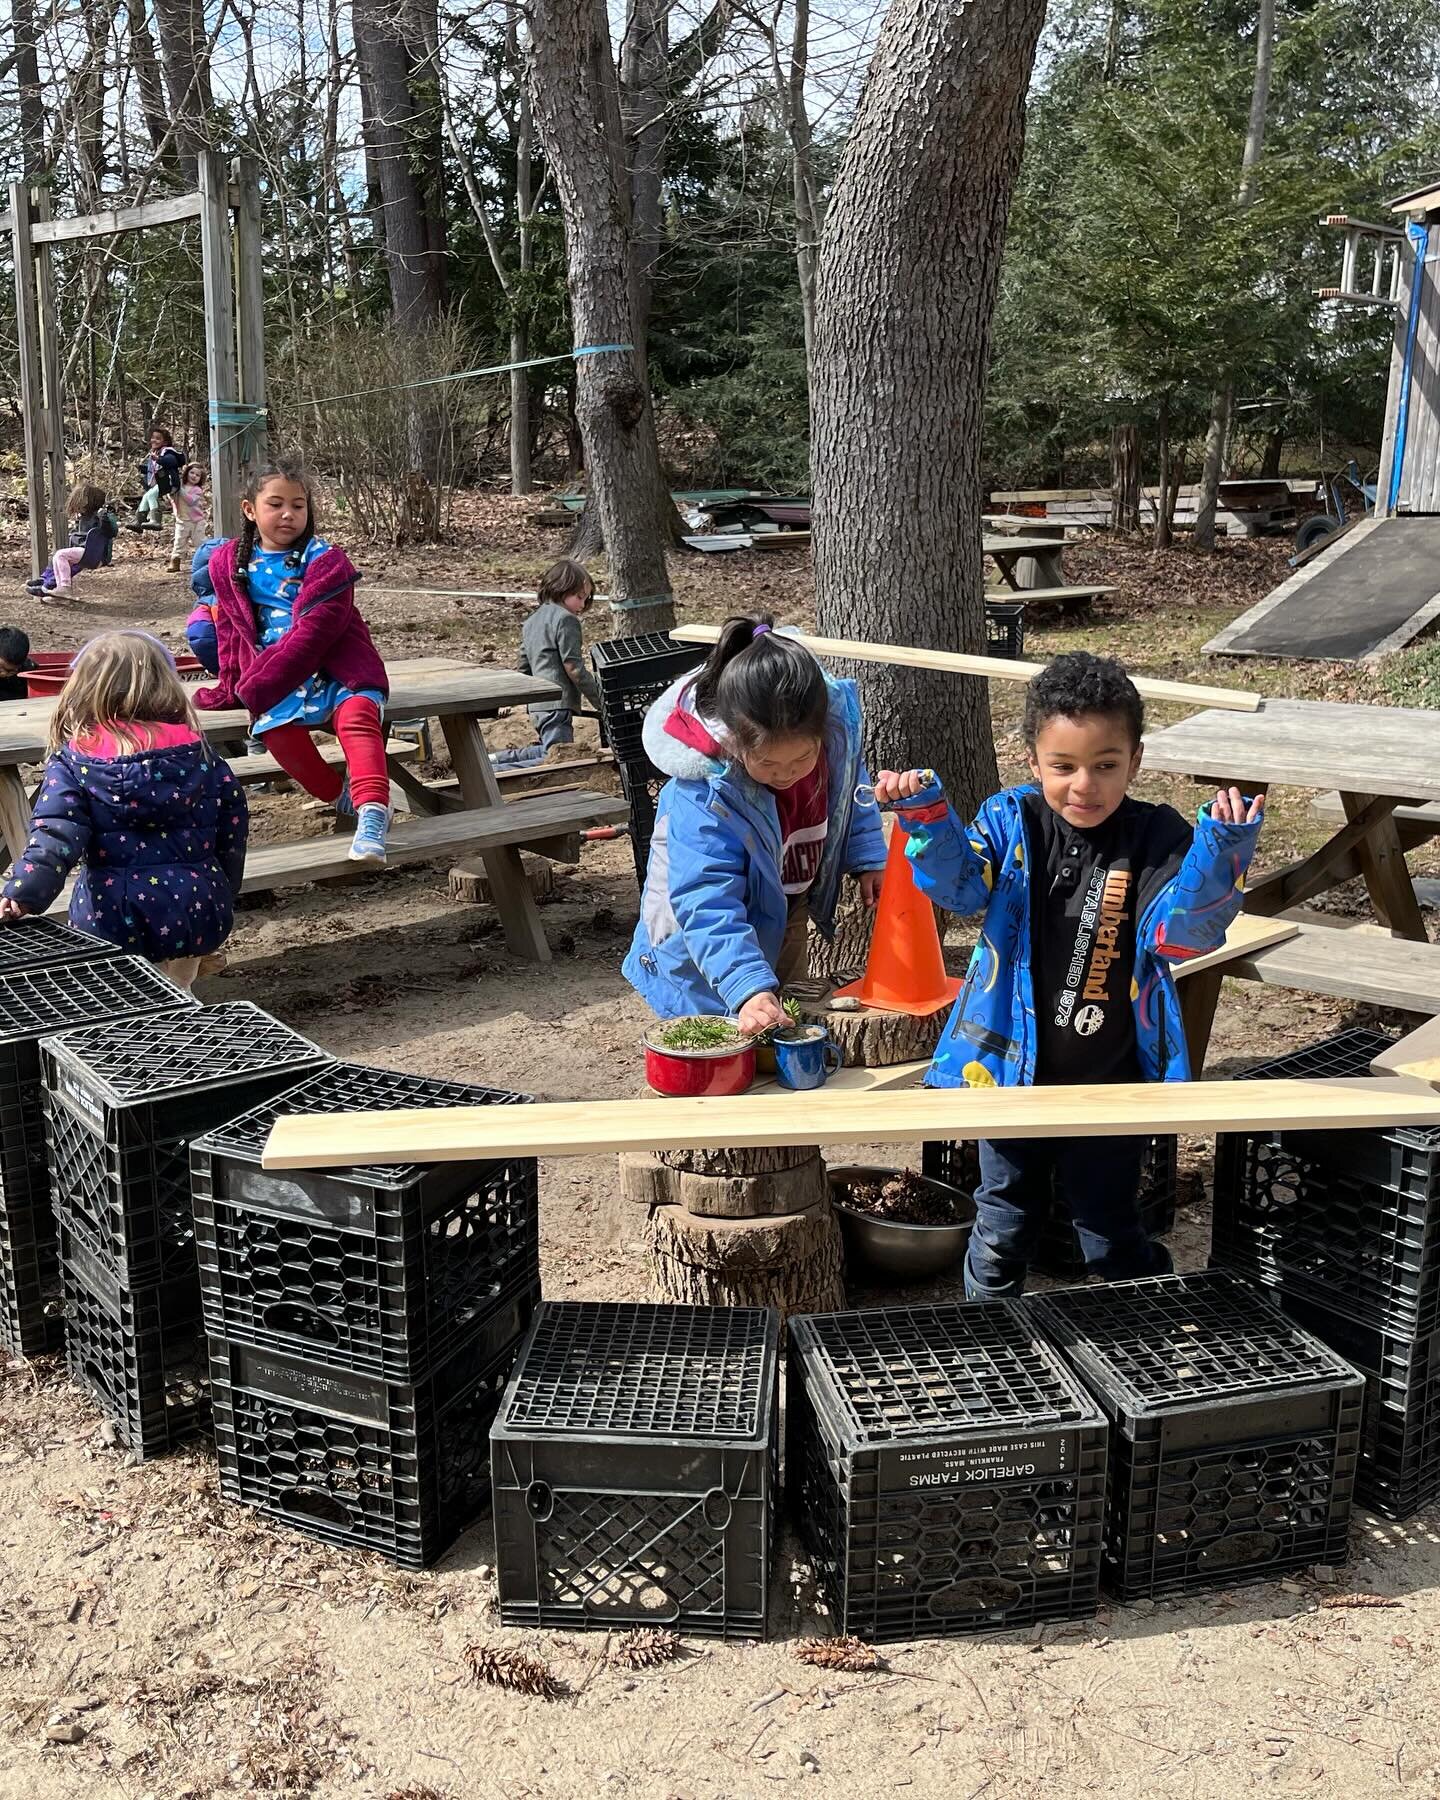 Playing with loose parts allows our students to create their own playscapes while collaborating with one another. Together they build stores, floors and more! #looseparts #loosepartsplay #preschoolactivities #preschool #commonschool #amherstma